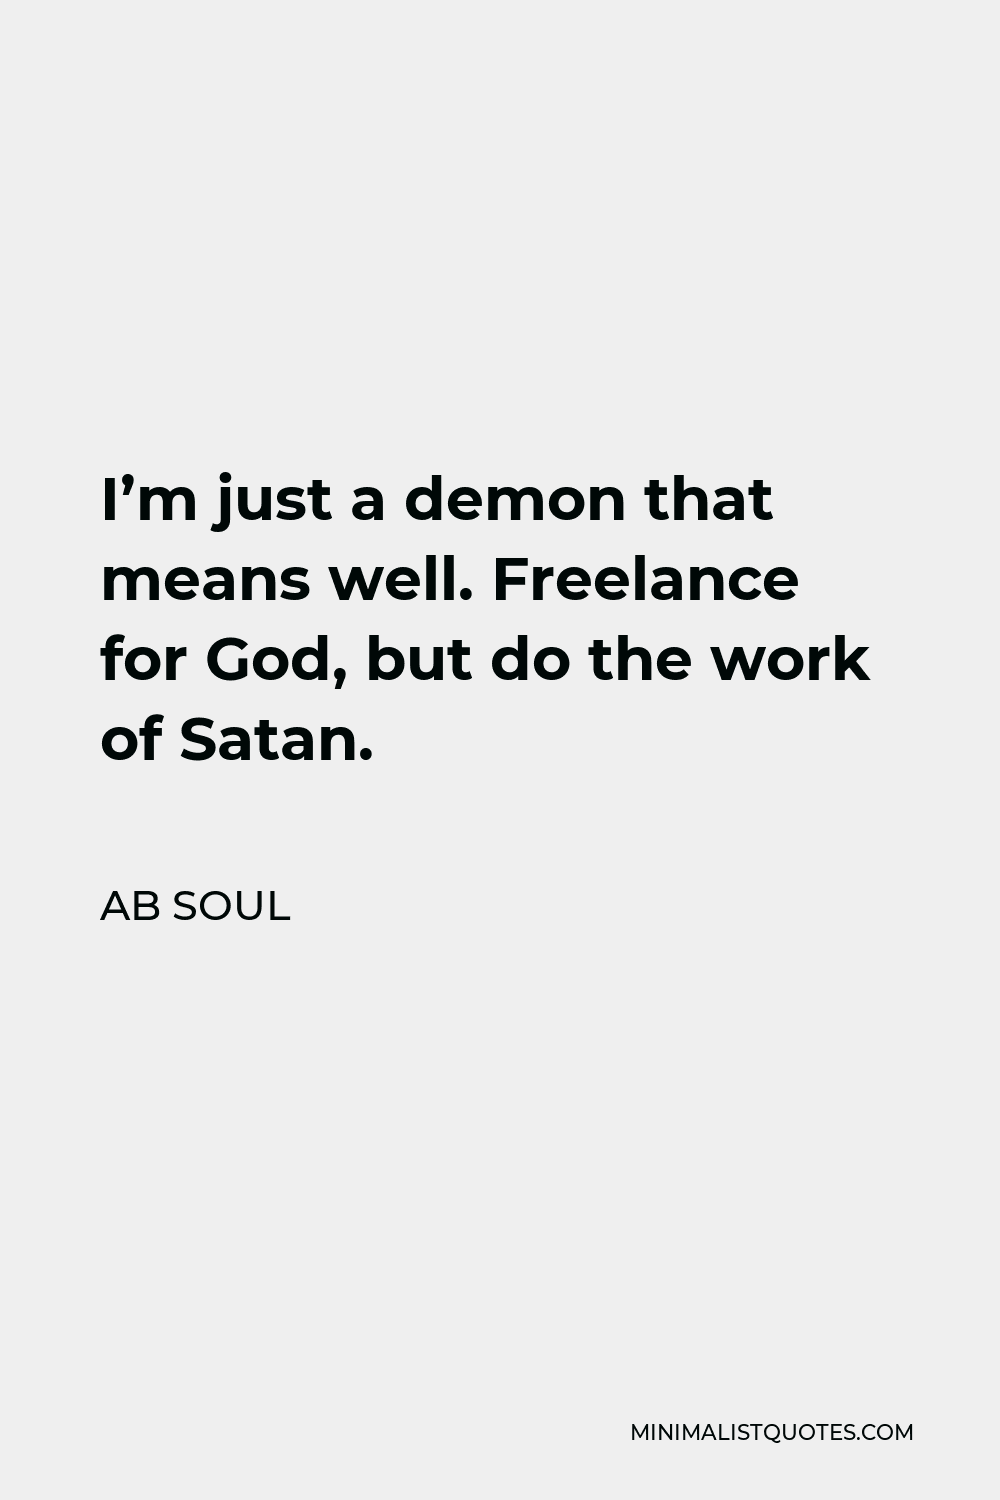 AB Soul Quote - I’m just a demon that means well. Freelance for God, but do the work of Satan.